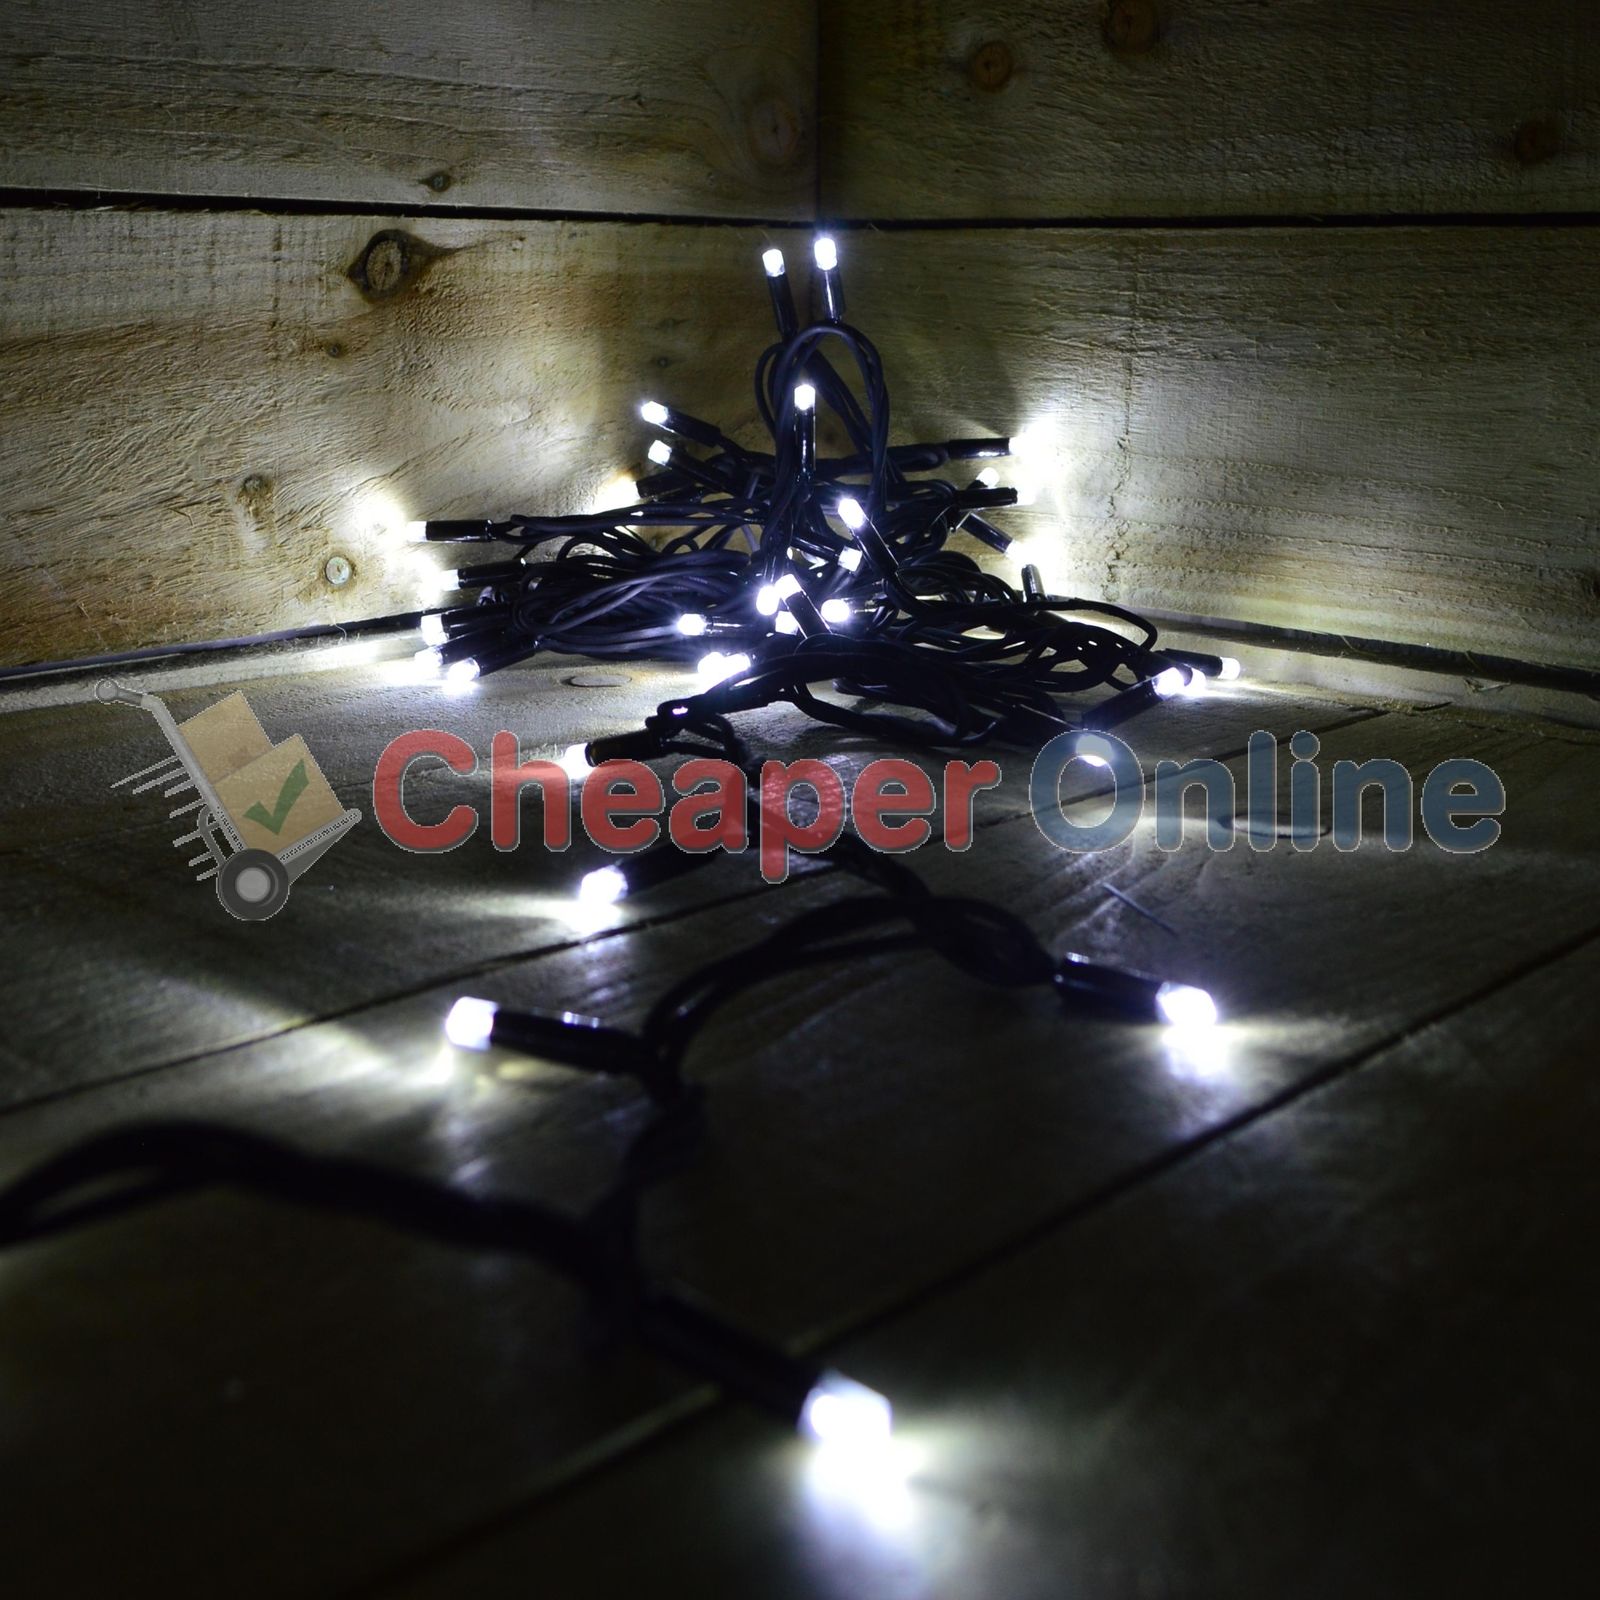 300 Ice White LED Super Long Snowtime 29.9m Connectable Lights on a Black Cable